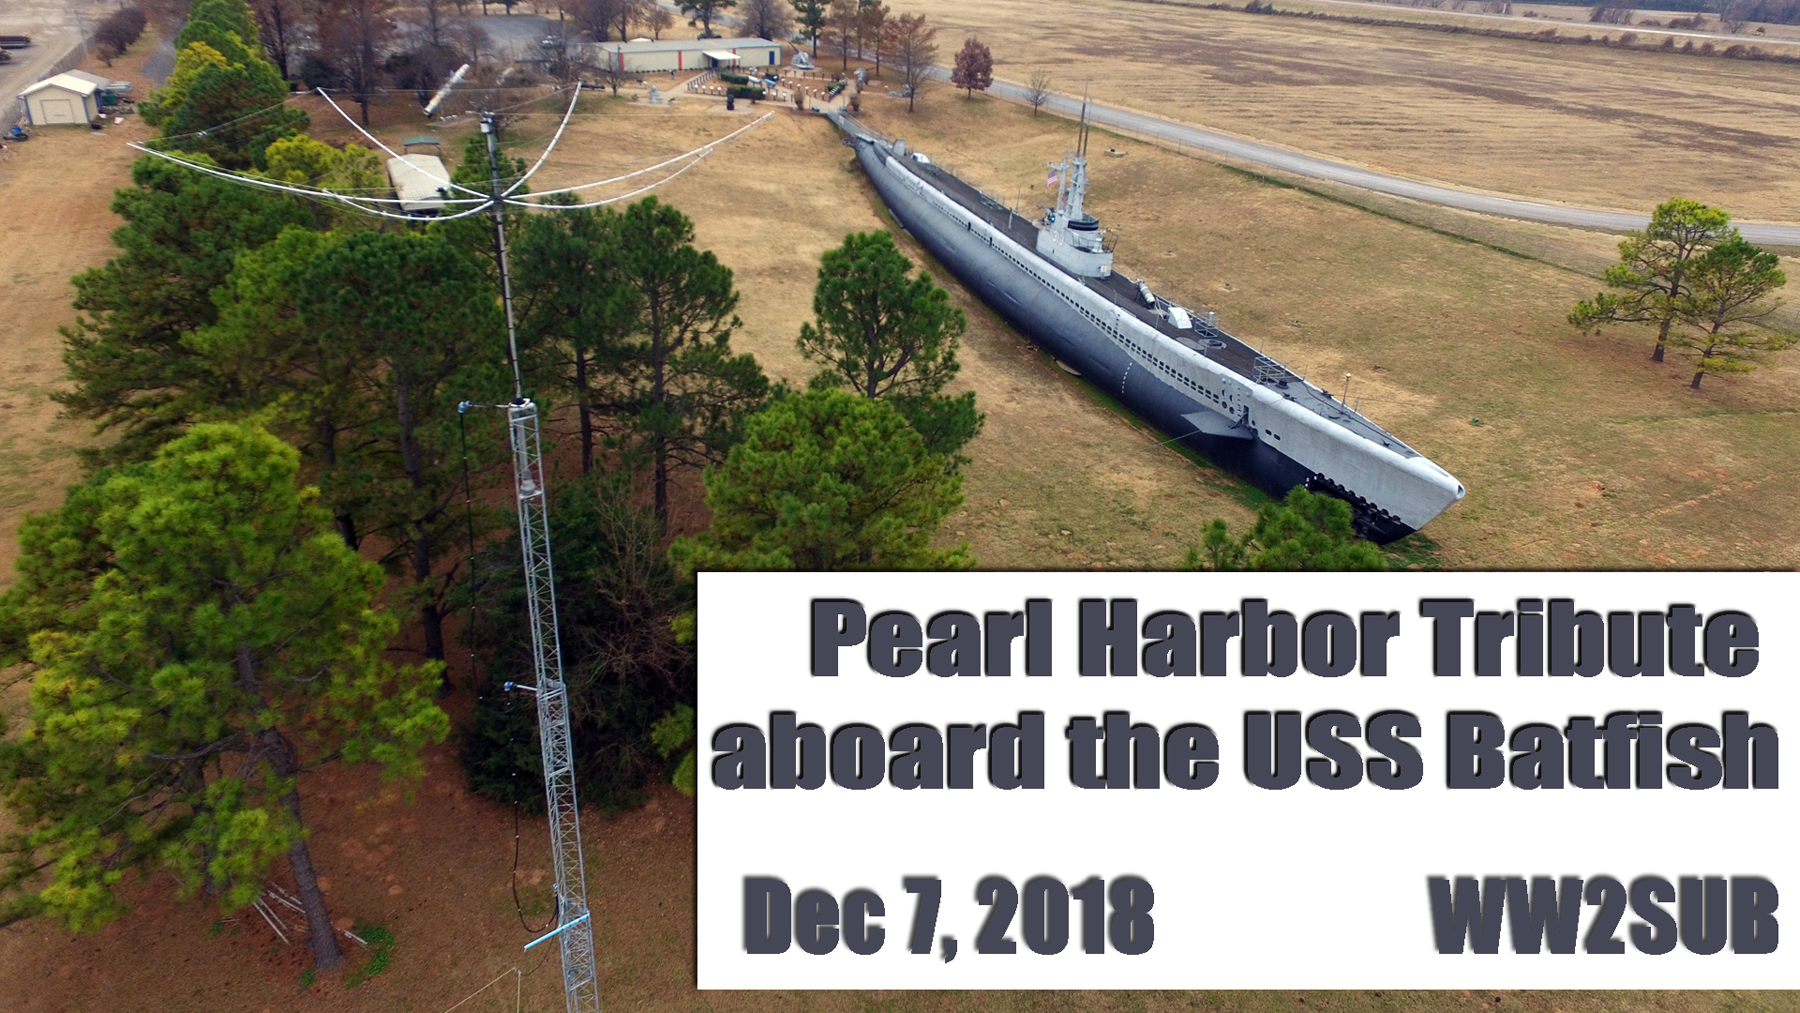 Episode 170: Pearl Harbor Tribute from the USS Batfish – WW2SUB